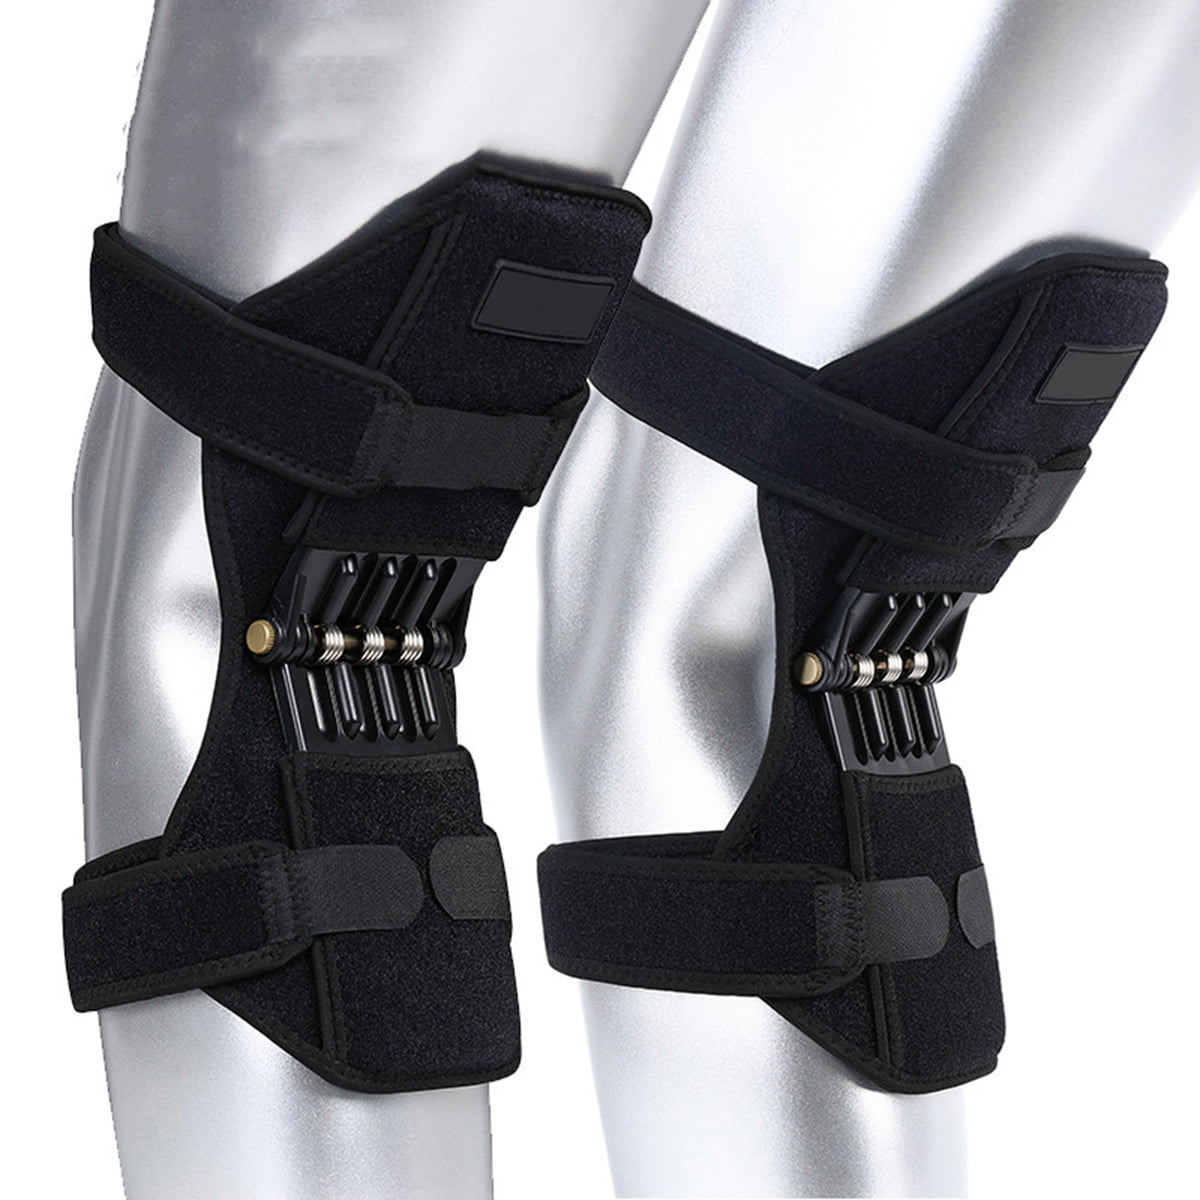 Power Leg Knee Stabilizer Pads Powerful Rebound Spring Force Support Knee Pad 